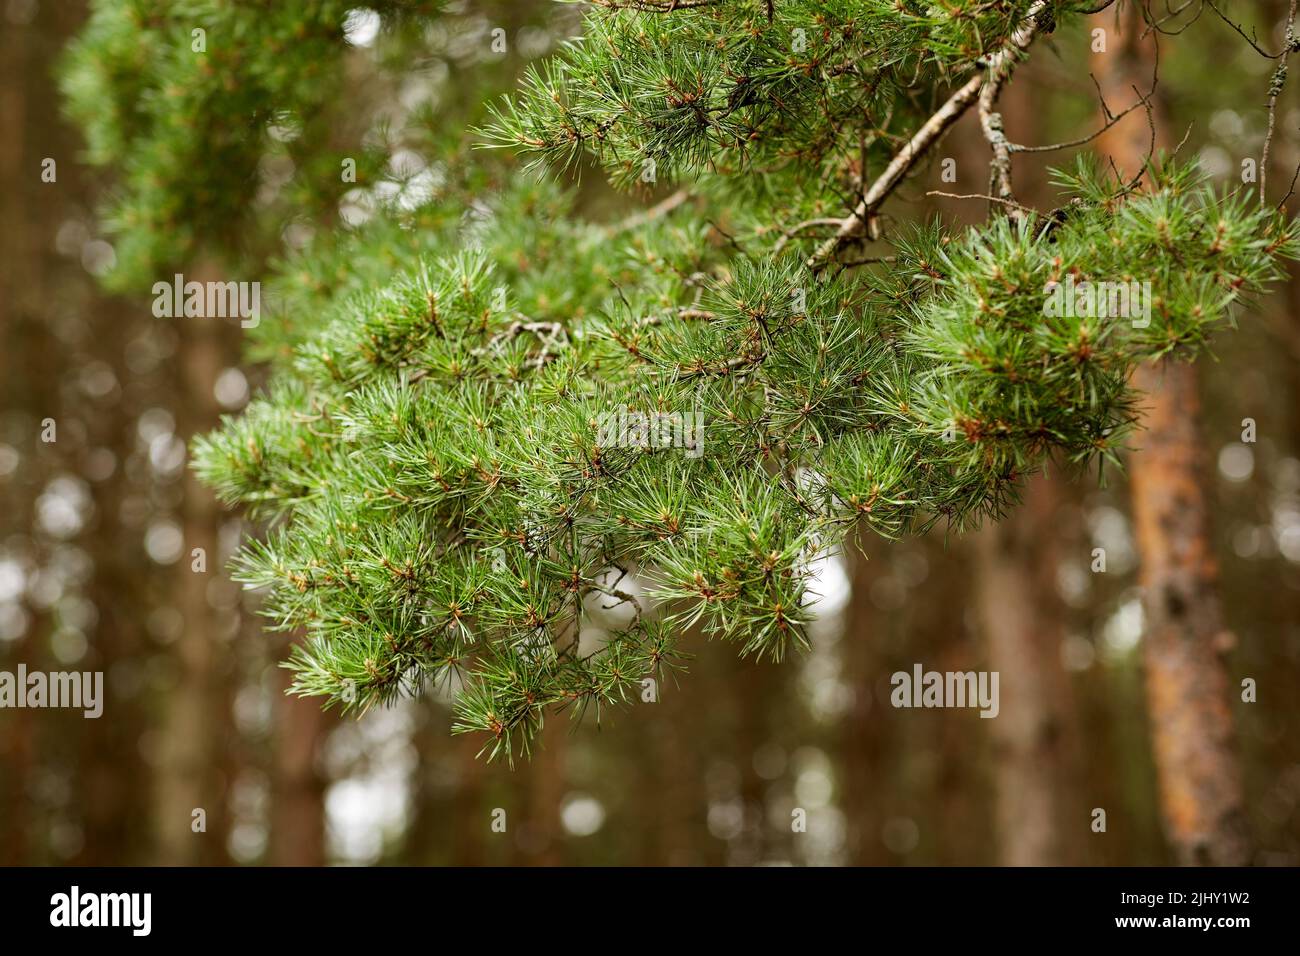 branch of pine tree in coniferous forest Stock Photo